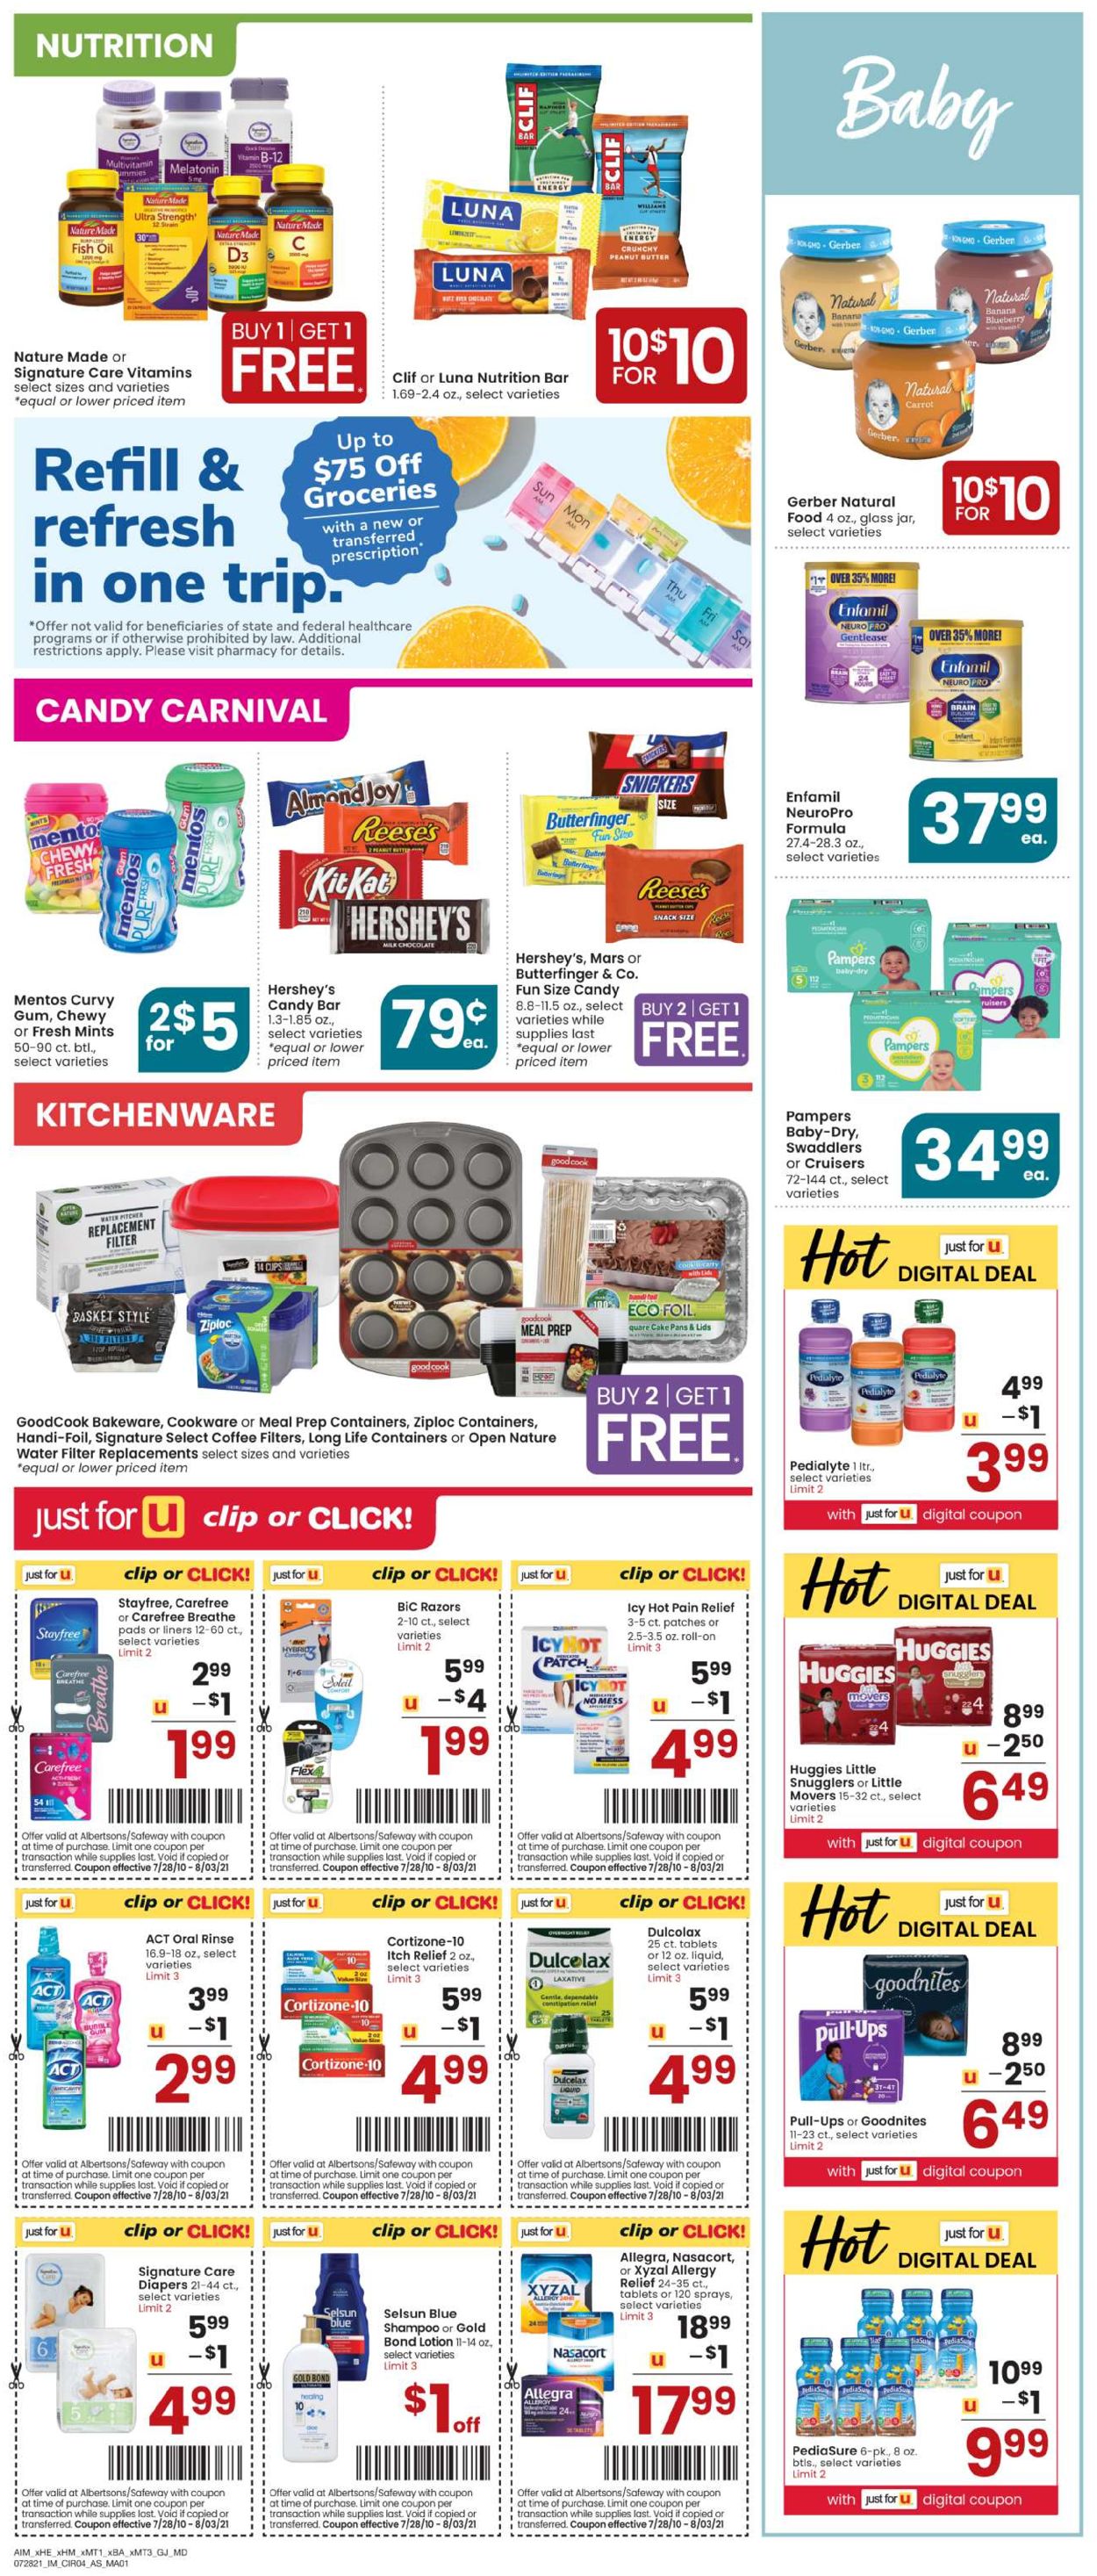 Albertsons Current weekly ad 07/28 - 08/03/2021 [4] - frequent-ads.com